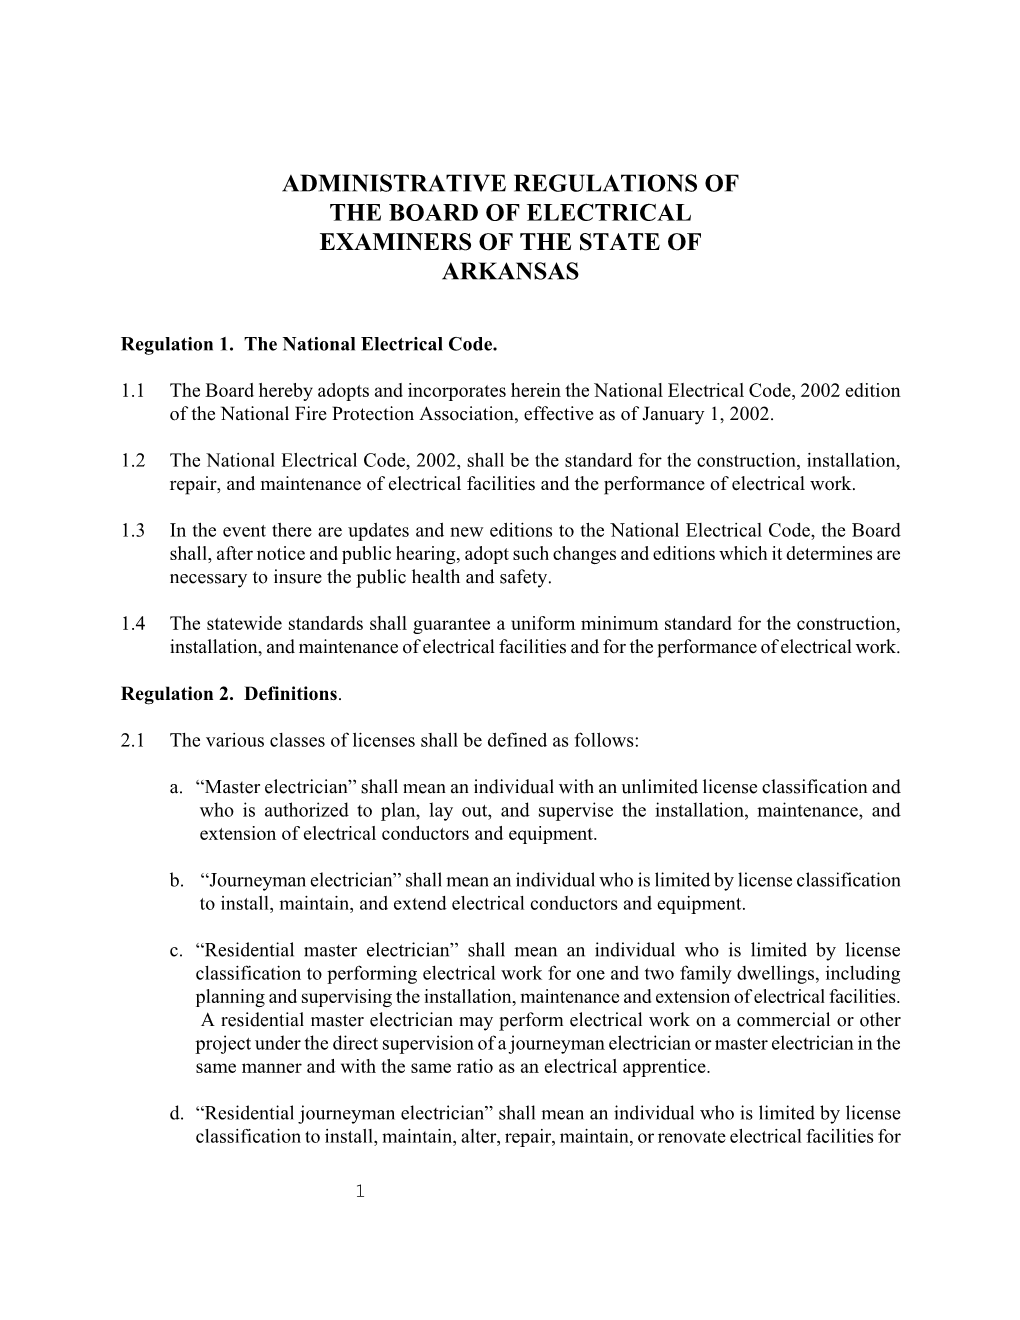 Administrative Regulations of the Board of Electrical Examiners of the State of Arkansas